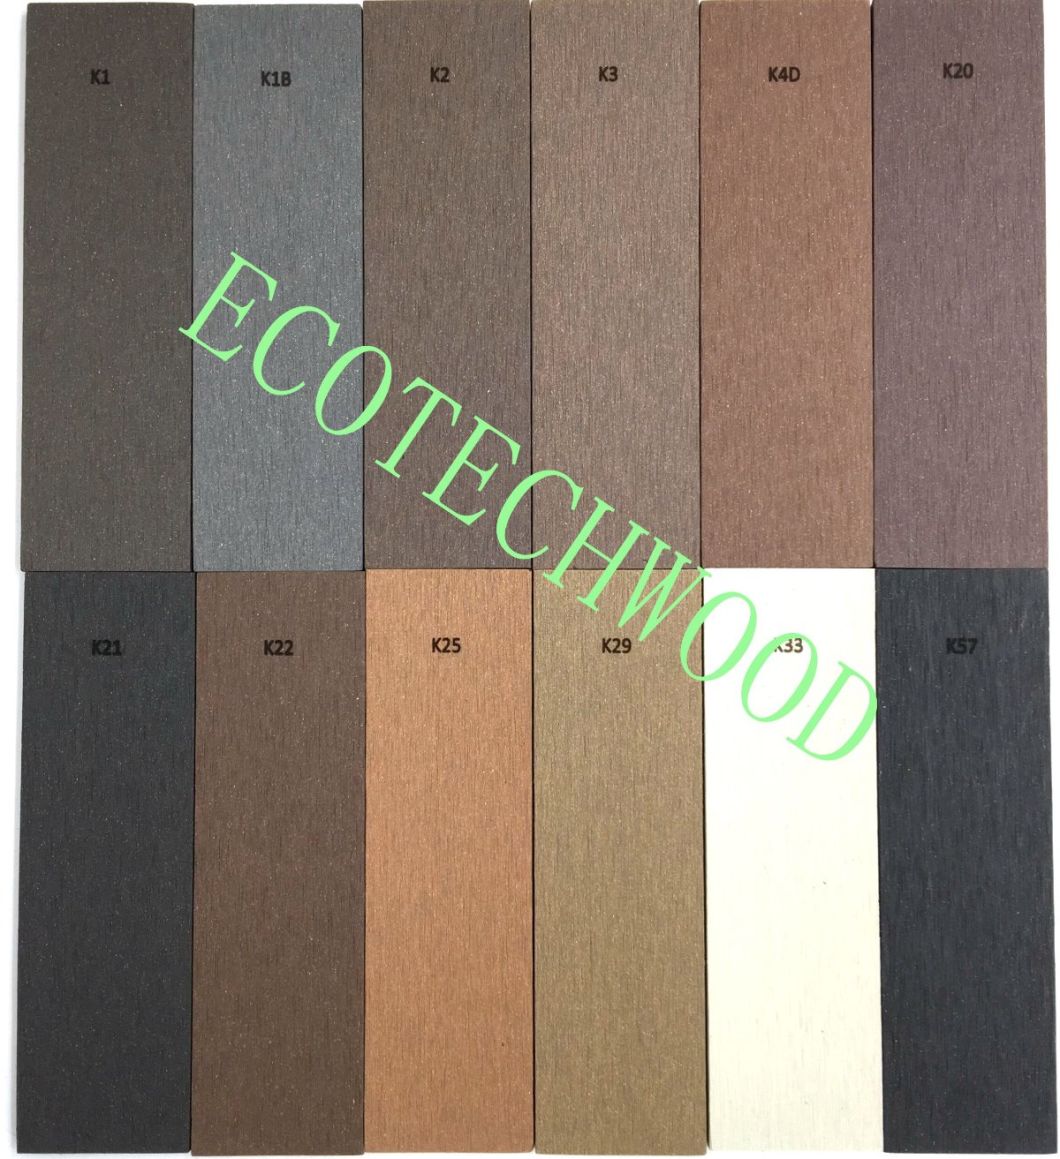 Most Popular Embossed WPC Flooring in Europe Markets